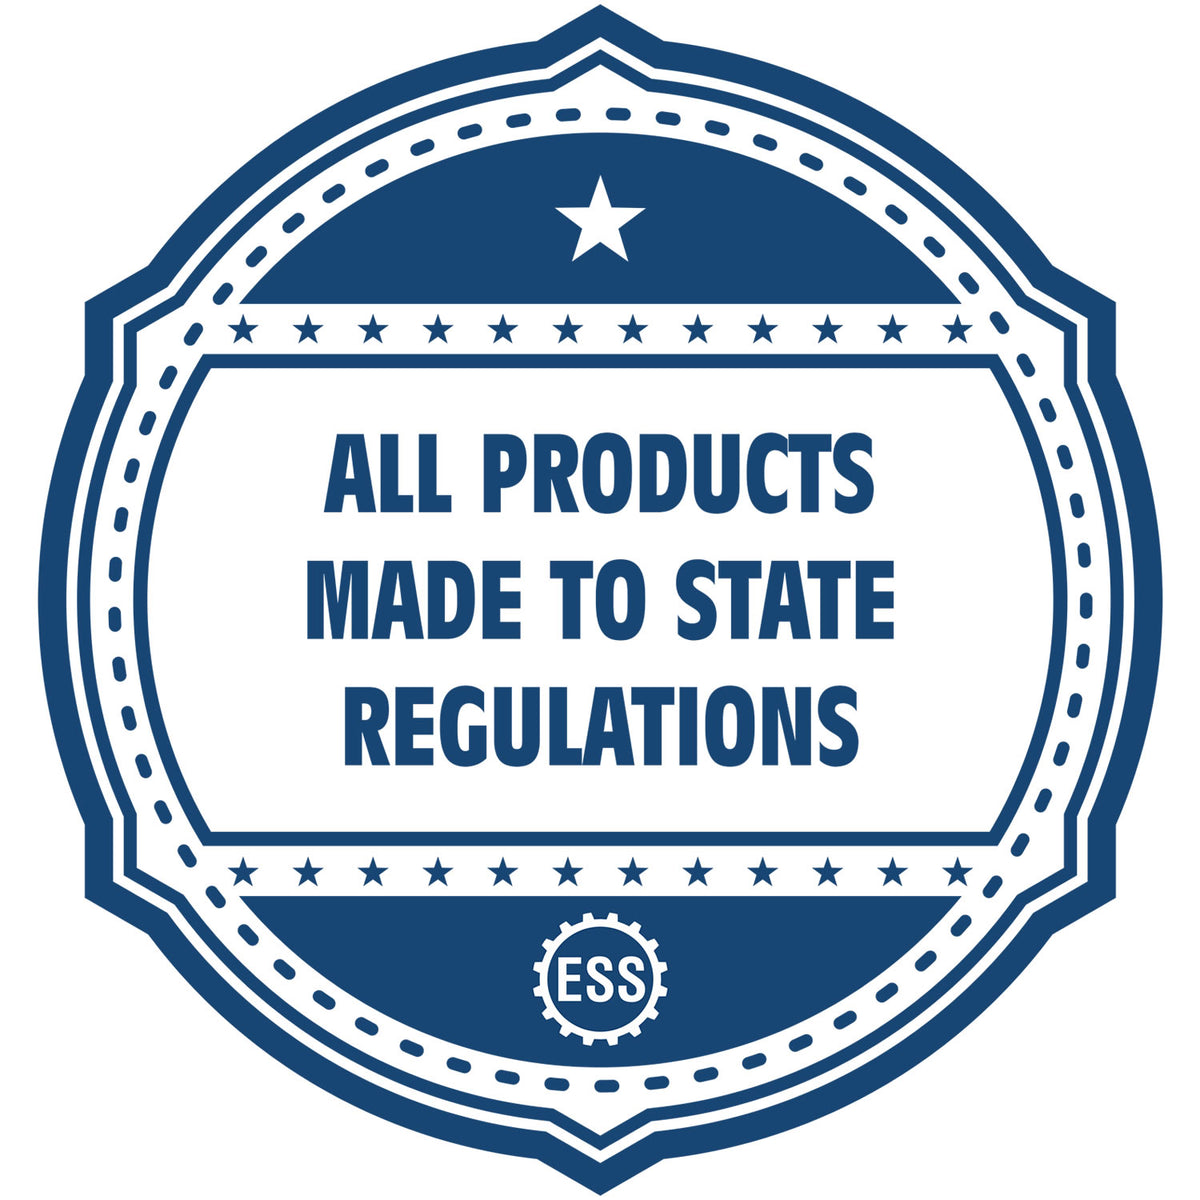 An icon or badge element for the State of New Hampshire Long Reach Architectural Embossing Seal showing that this product is made in compliance with state regulations.